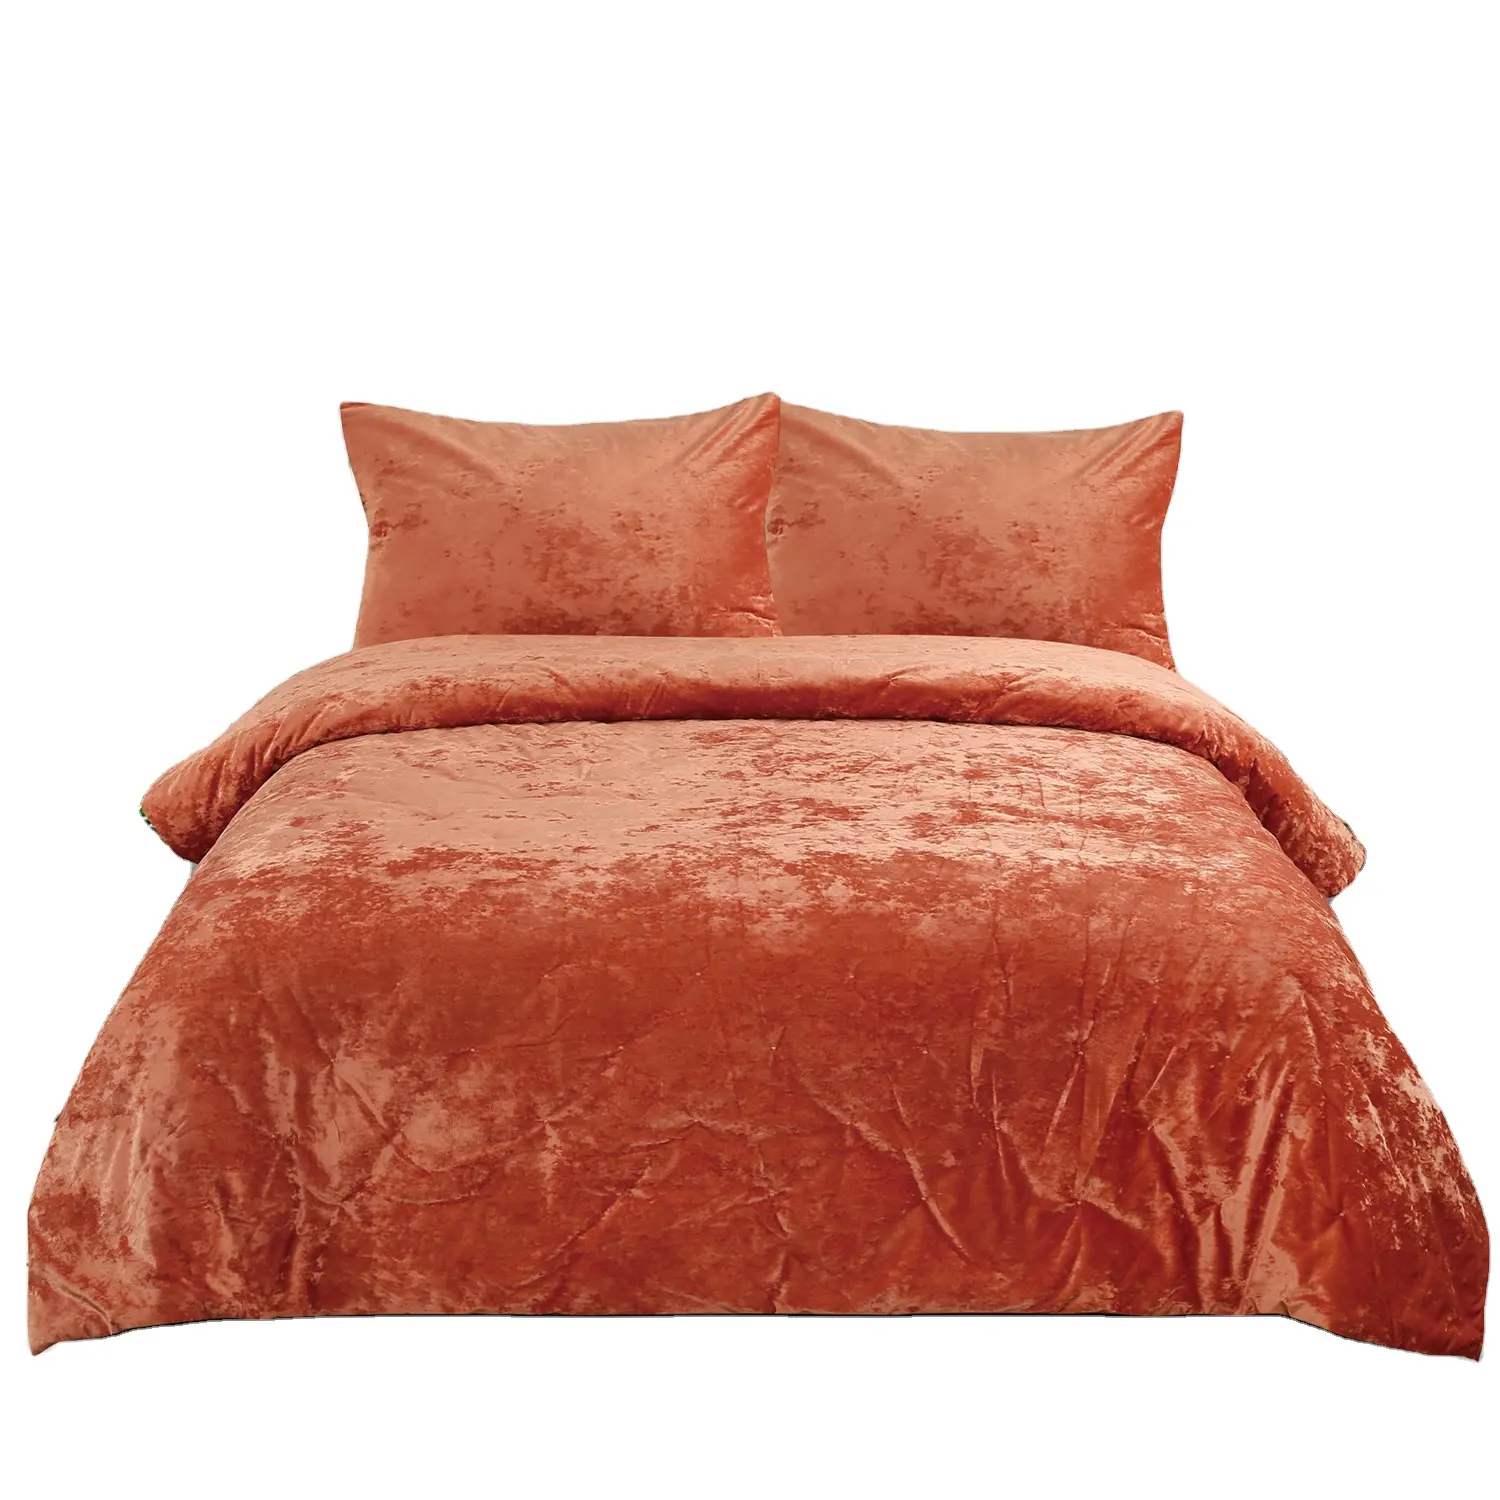 Export Velvet Quilts High Quality Pottery barn bedding sets Packaging for Bedding Solid quilted for home